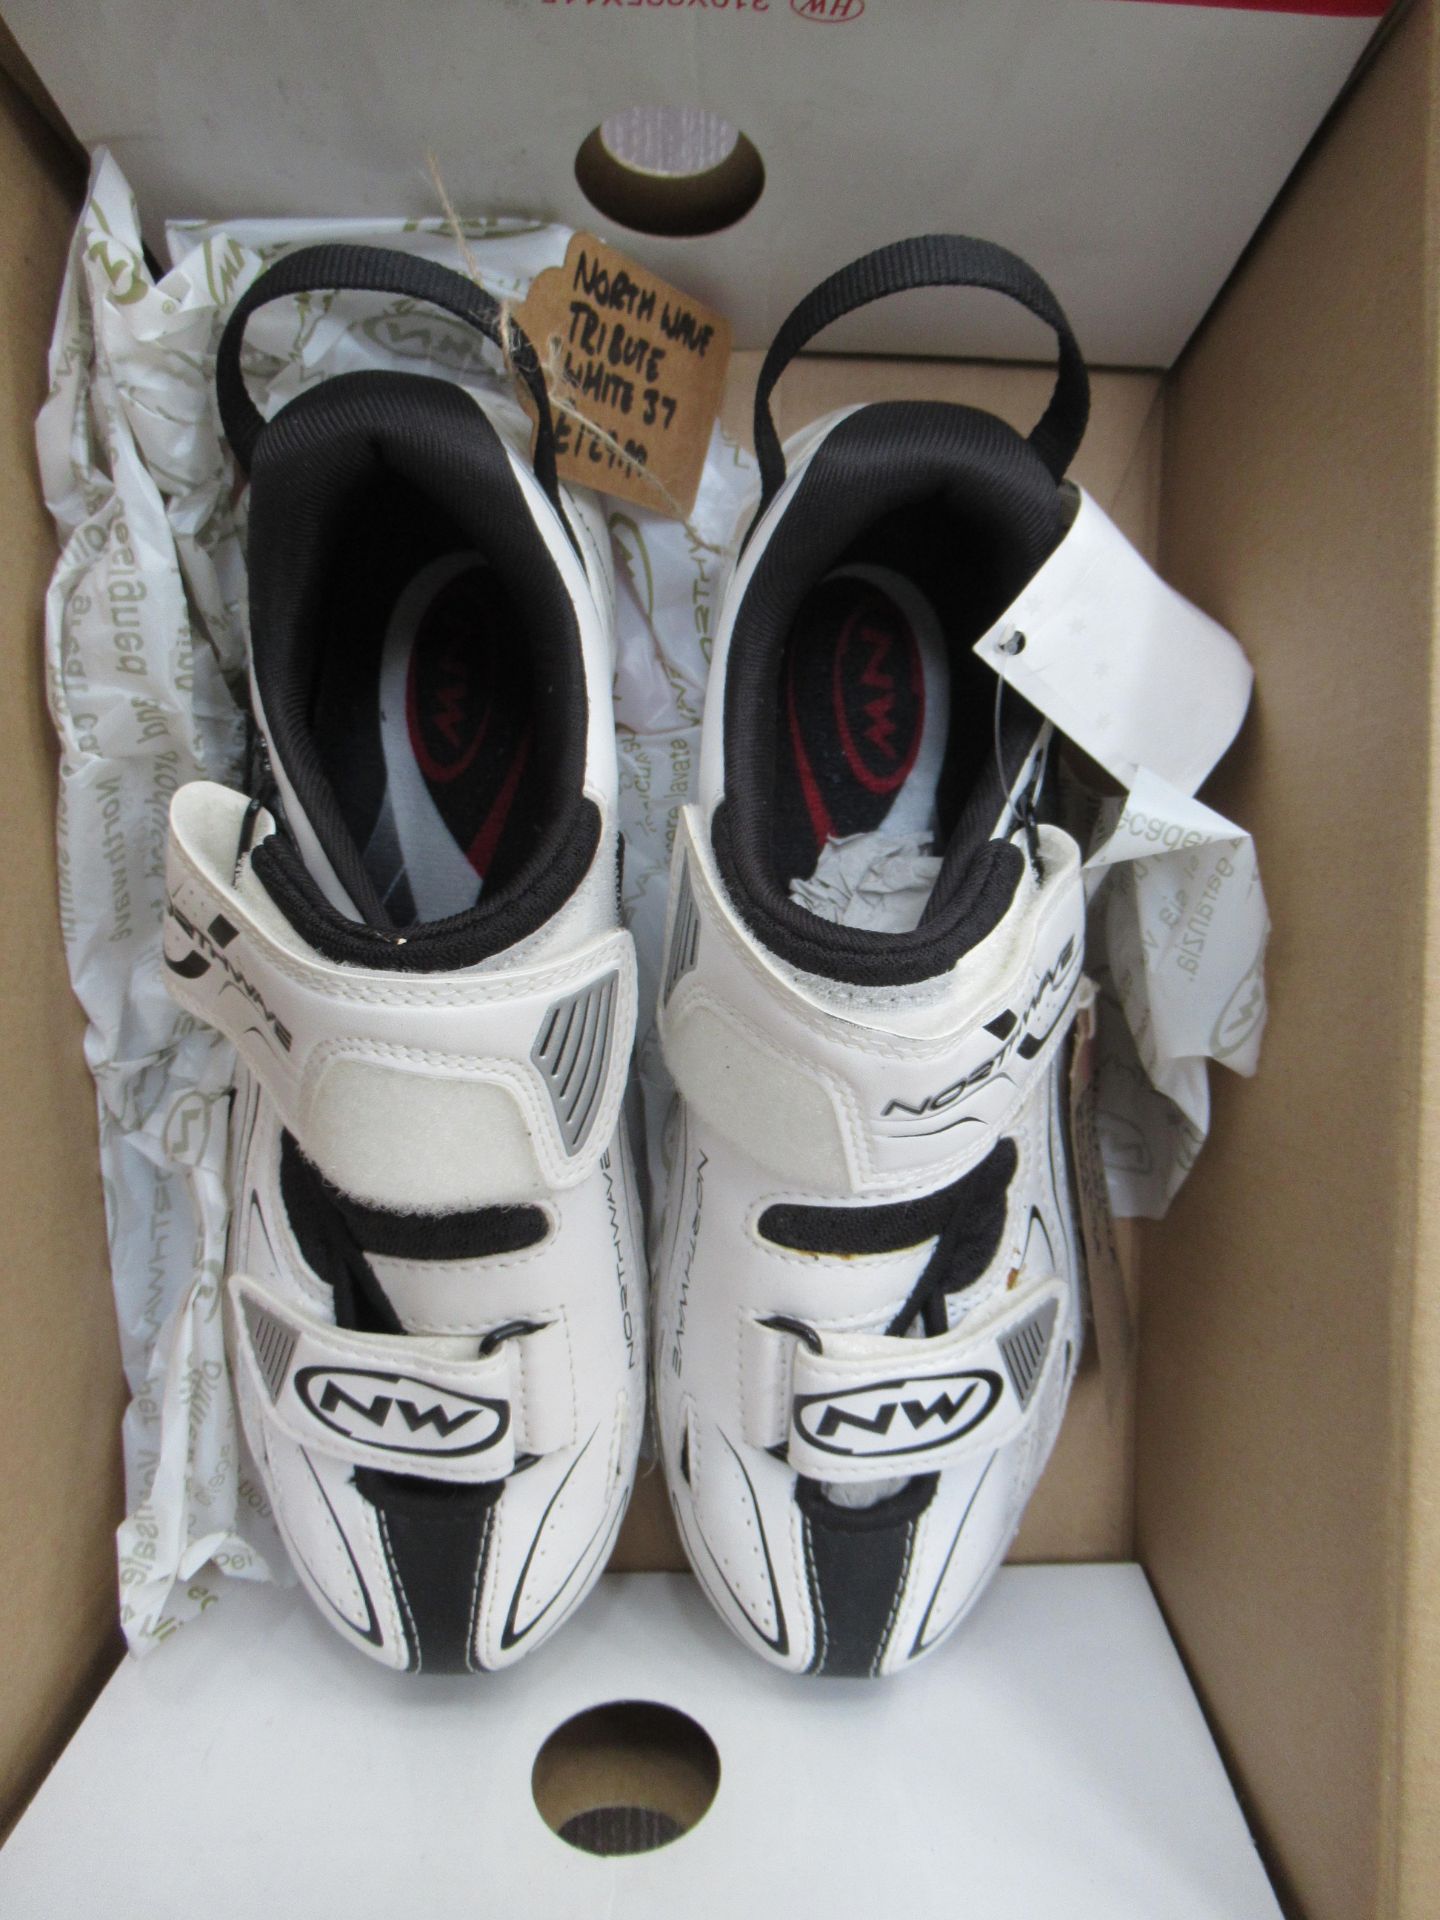 Pair of Northwave Tribute cycling shoes (white/black) - boxed EU size 37 (RRP£129.99) - Image 3 of 3